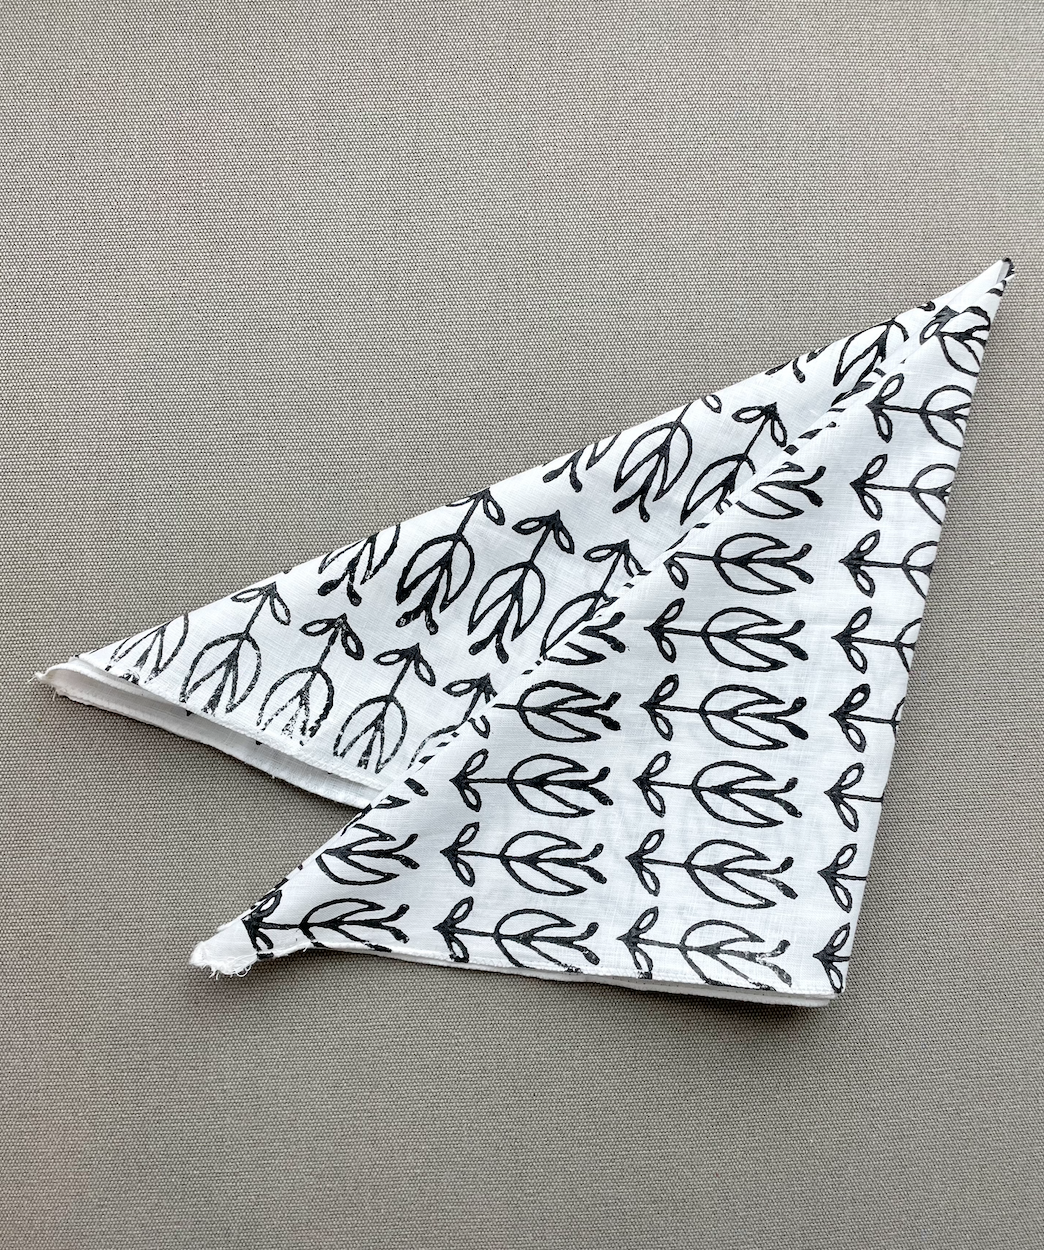 Bandana - White Linen with Sprout, Black